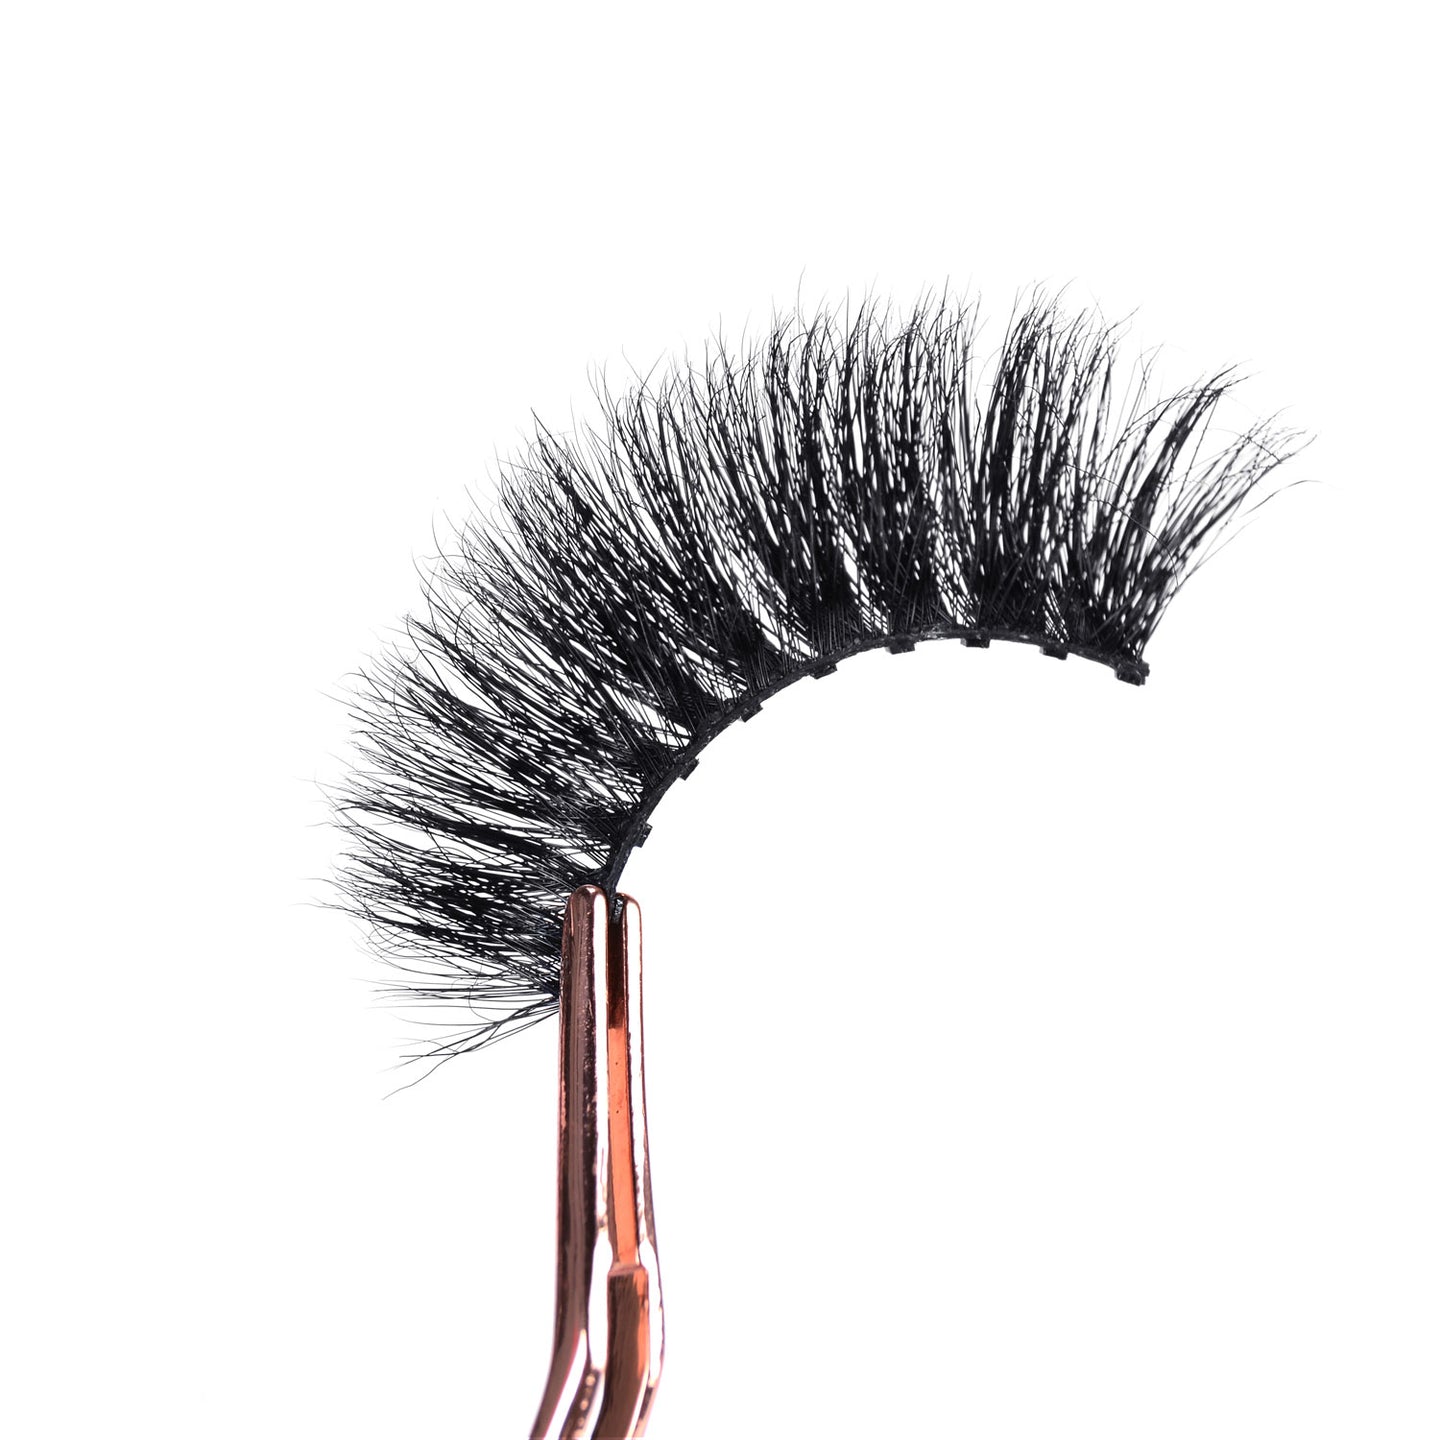 Dolly 3D Mink Lashes Mid - 10 pares